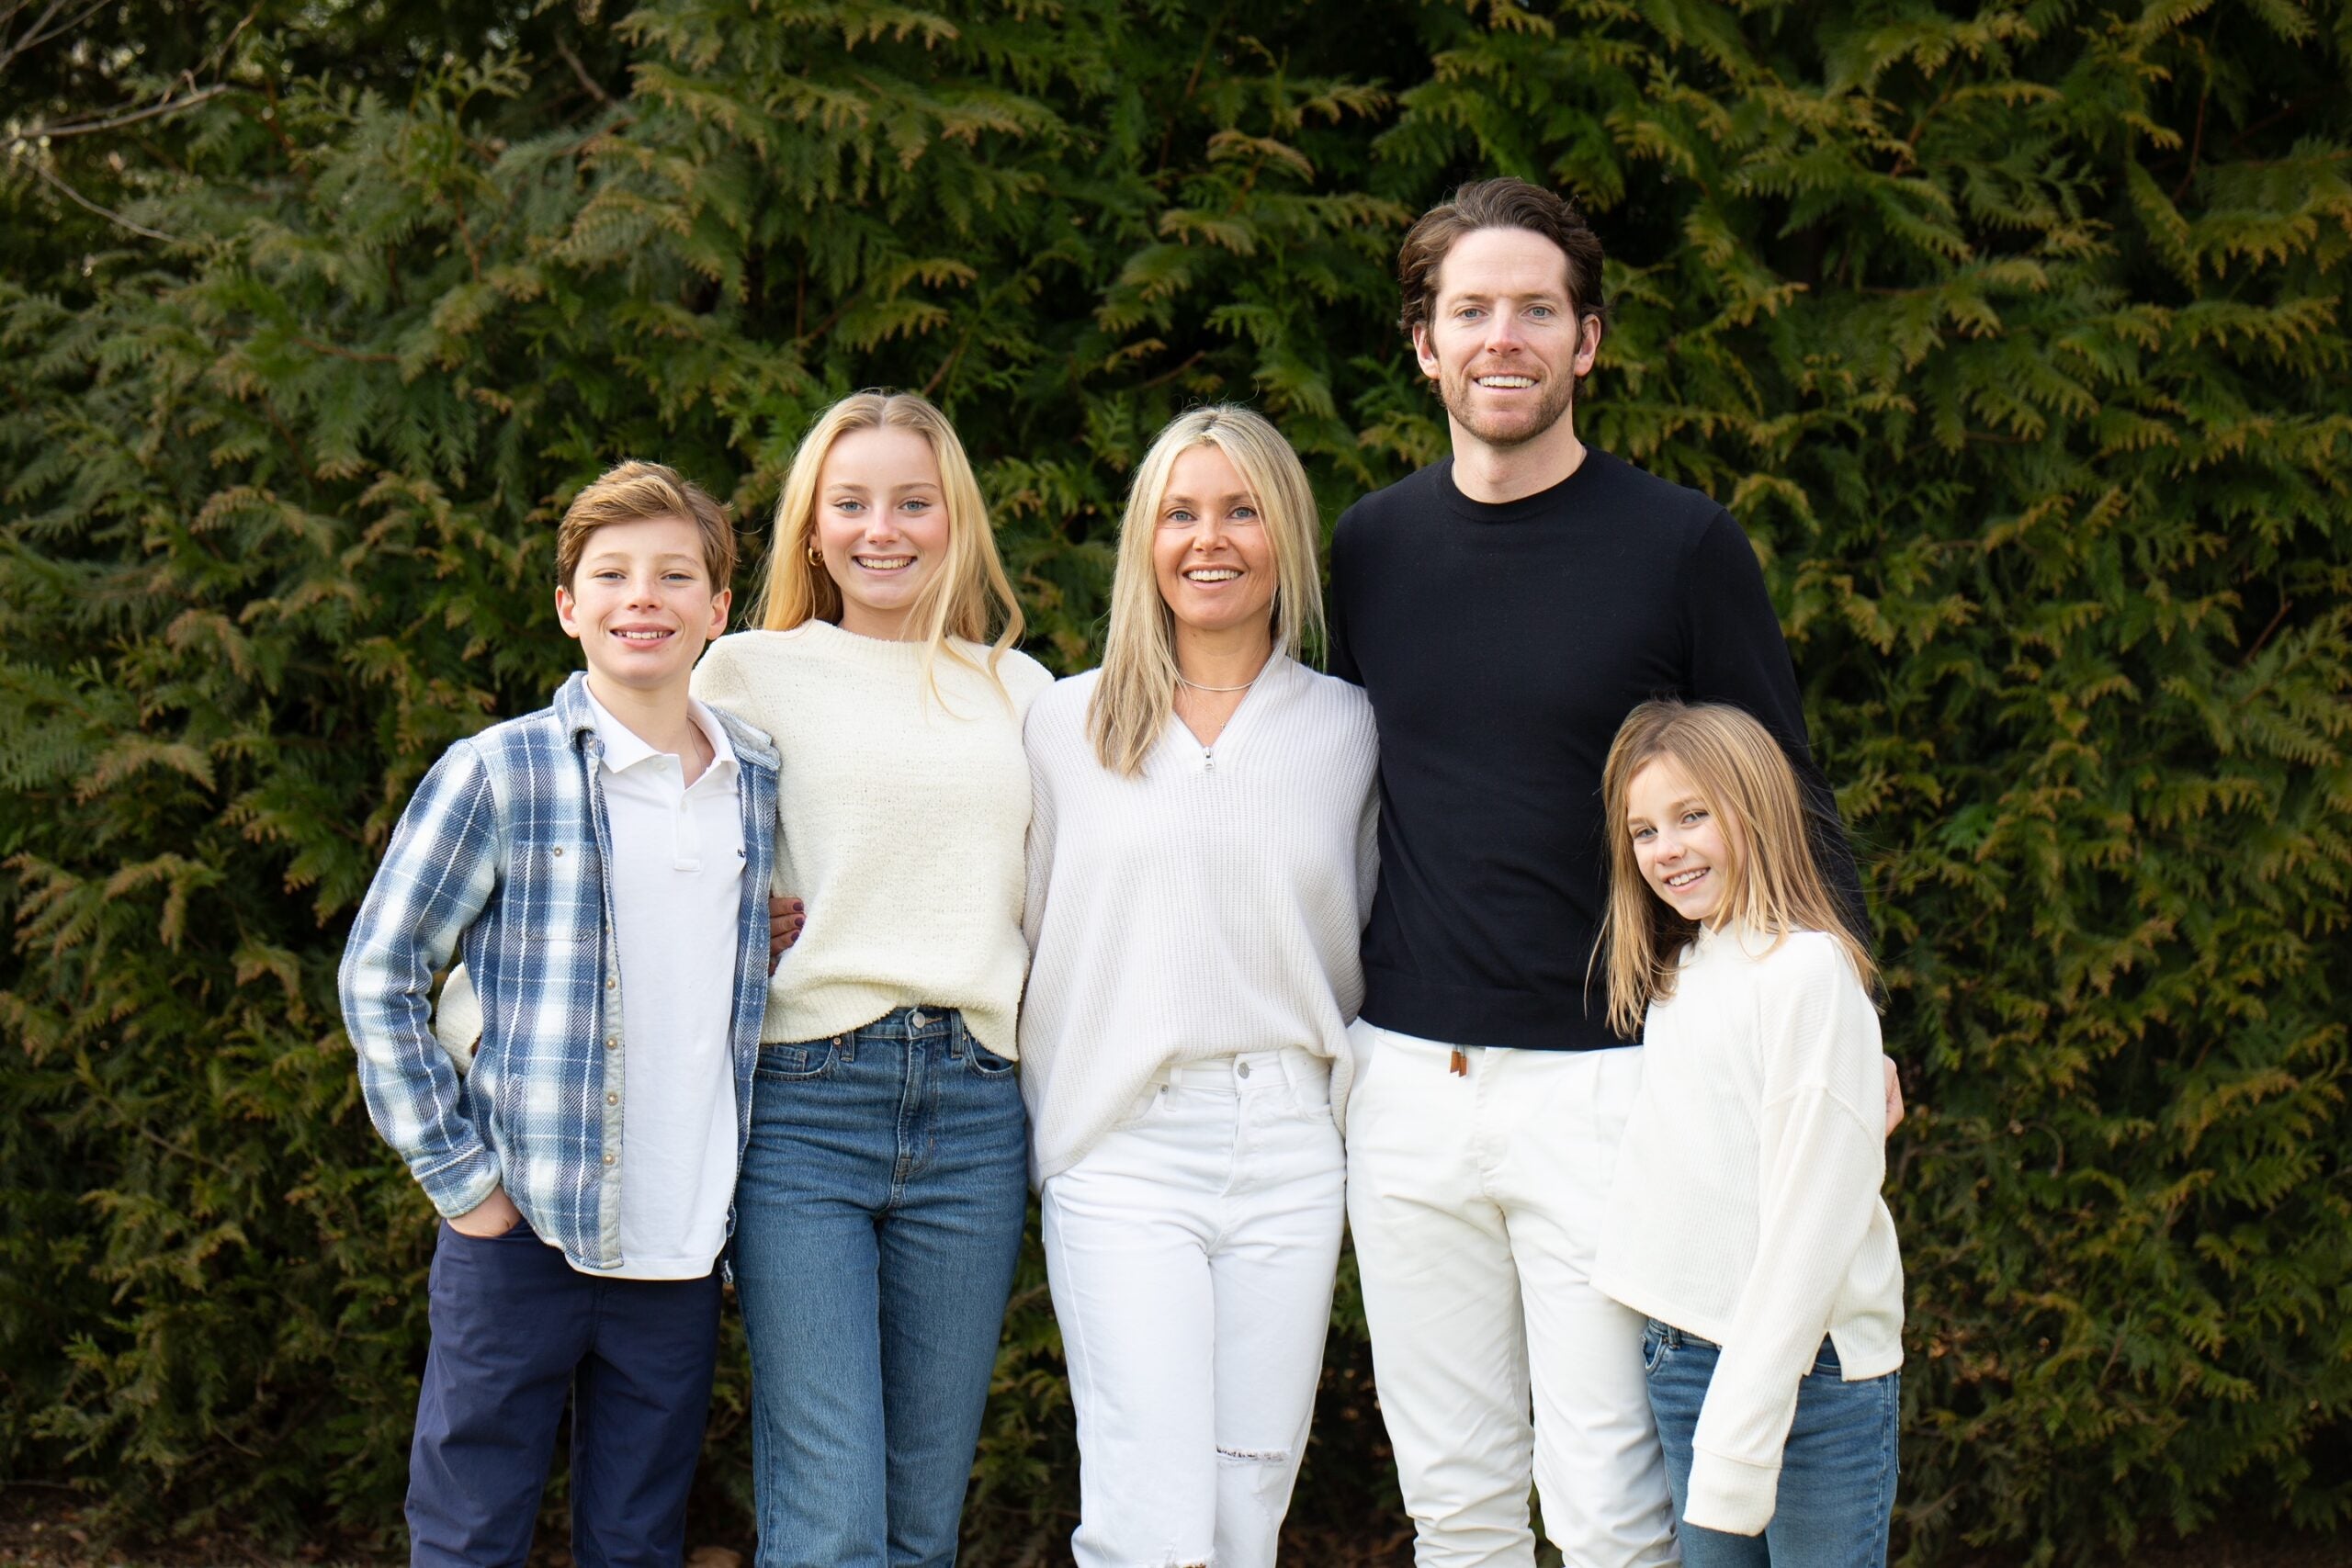 two parents and three kids pose together in front of a plant background